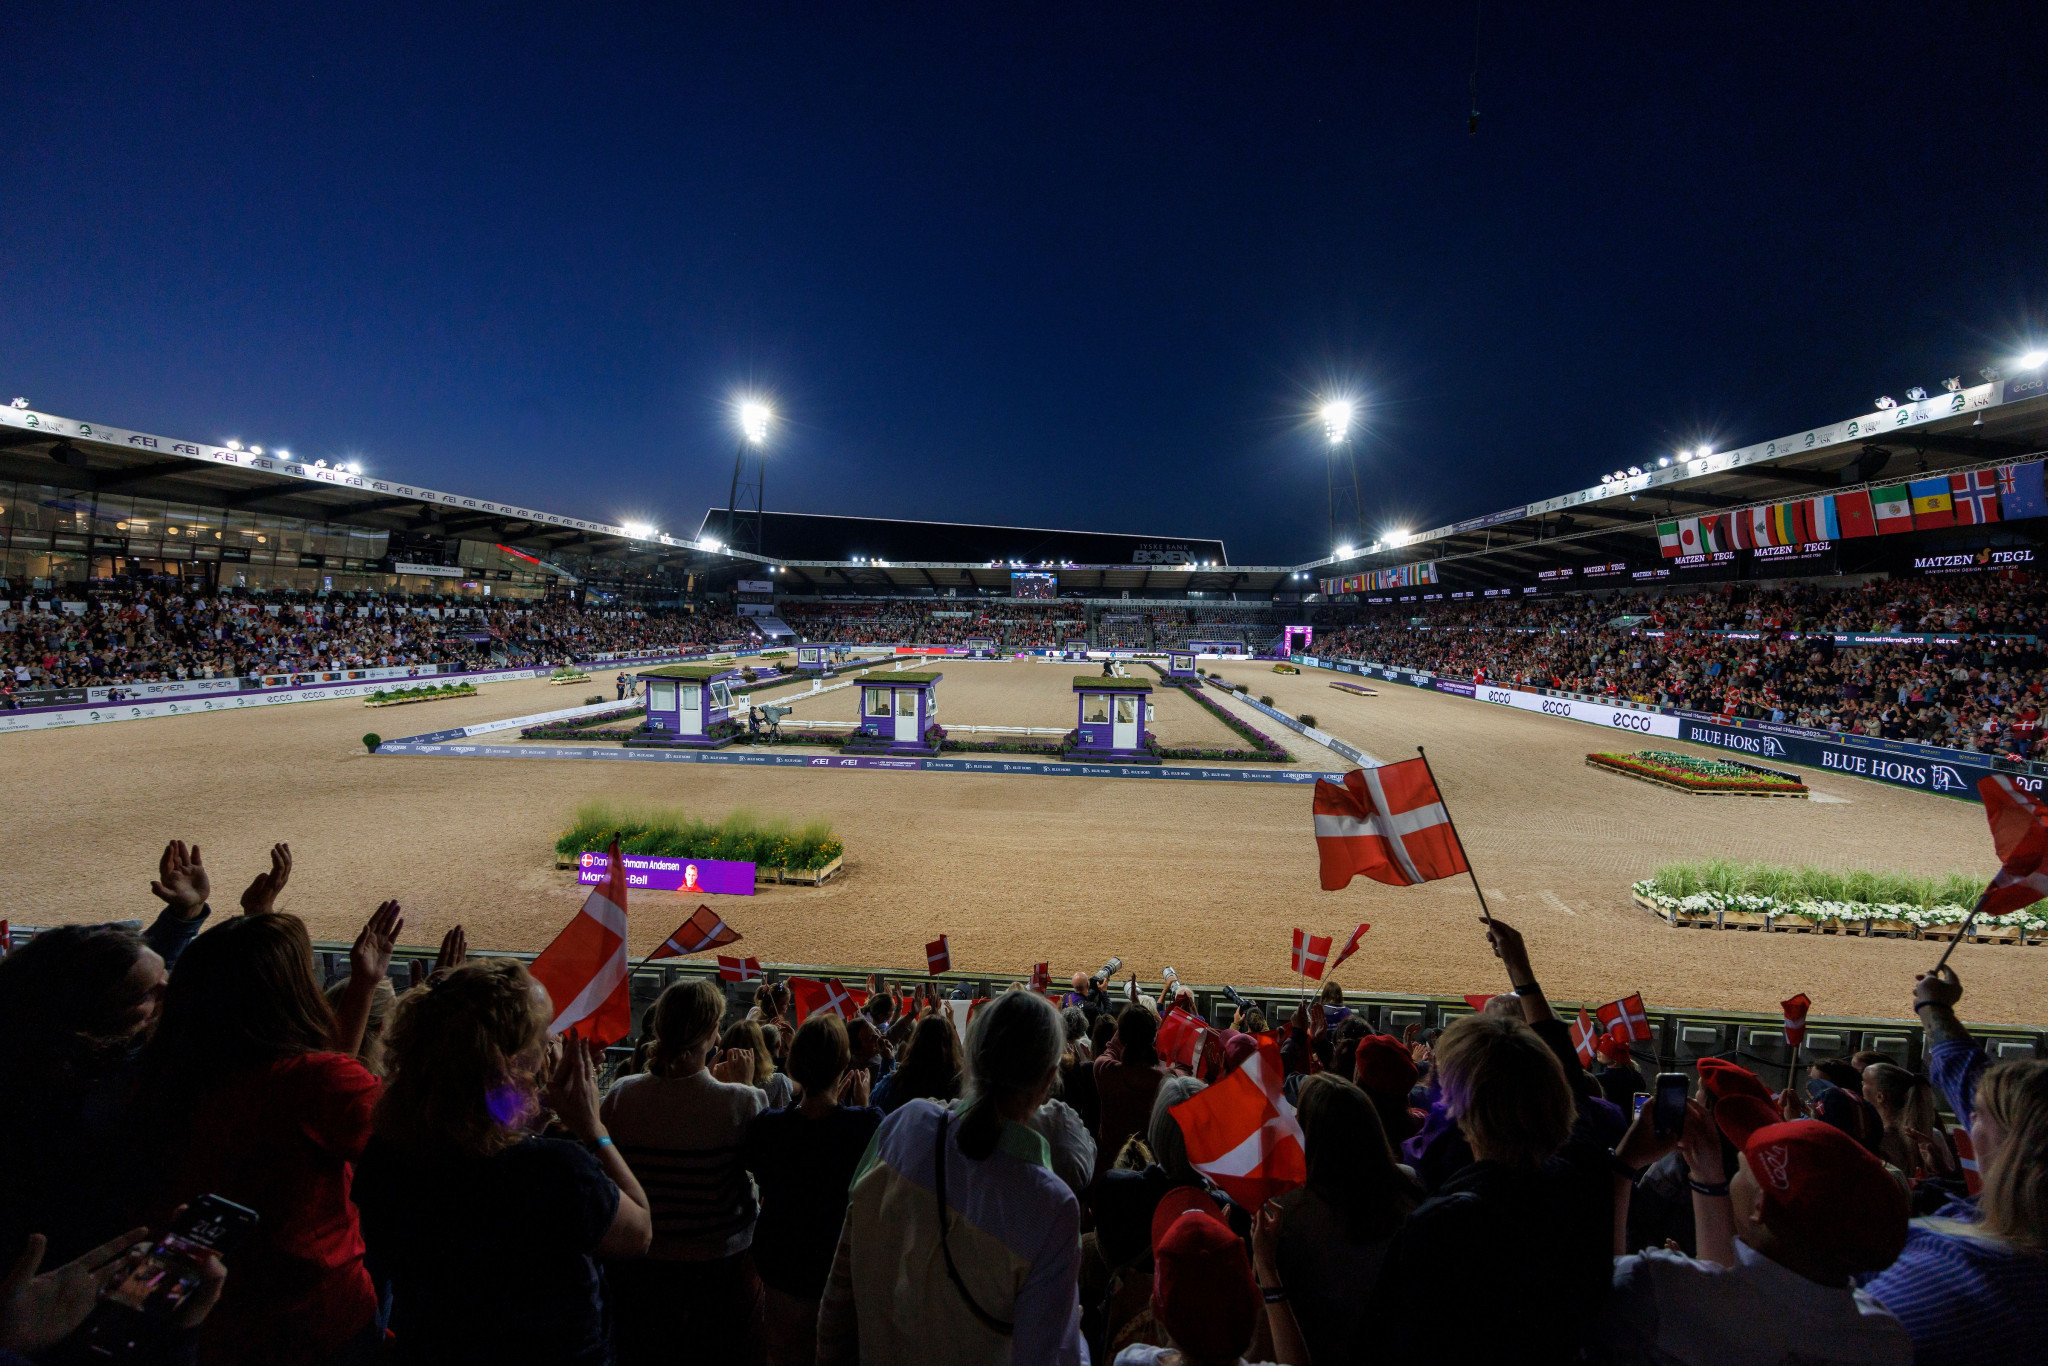 Ulf Helgstrand suggested that the reduction in costs aided Denmark's ability to host the FEI World Championships ©Herning2022/Stefan Lafrentz